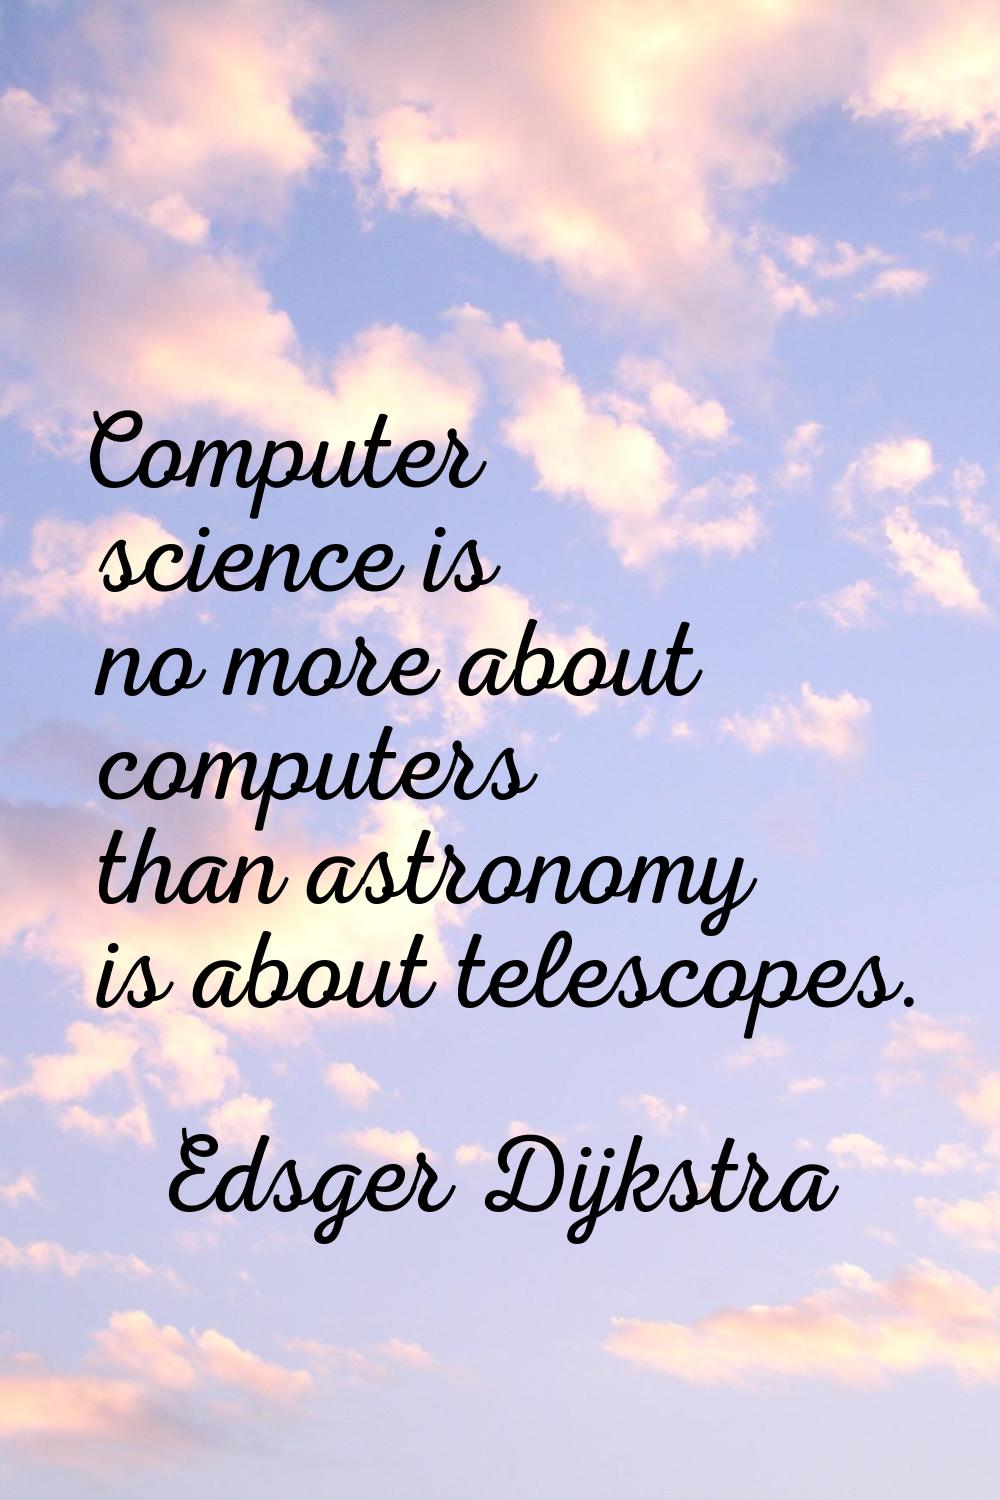 Computer science is no more about computers than astronomy is about telescopes.